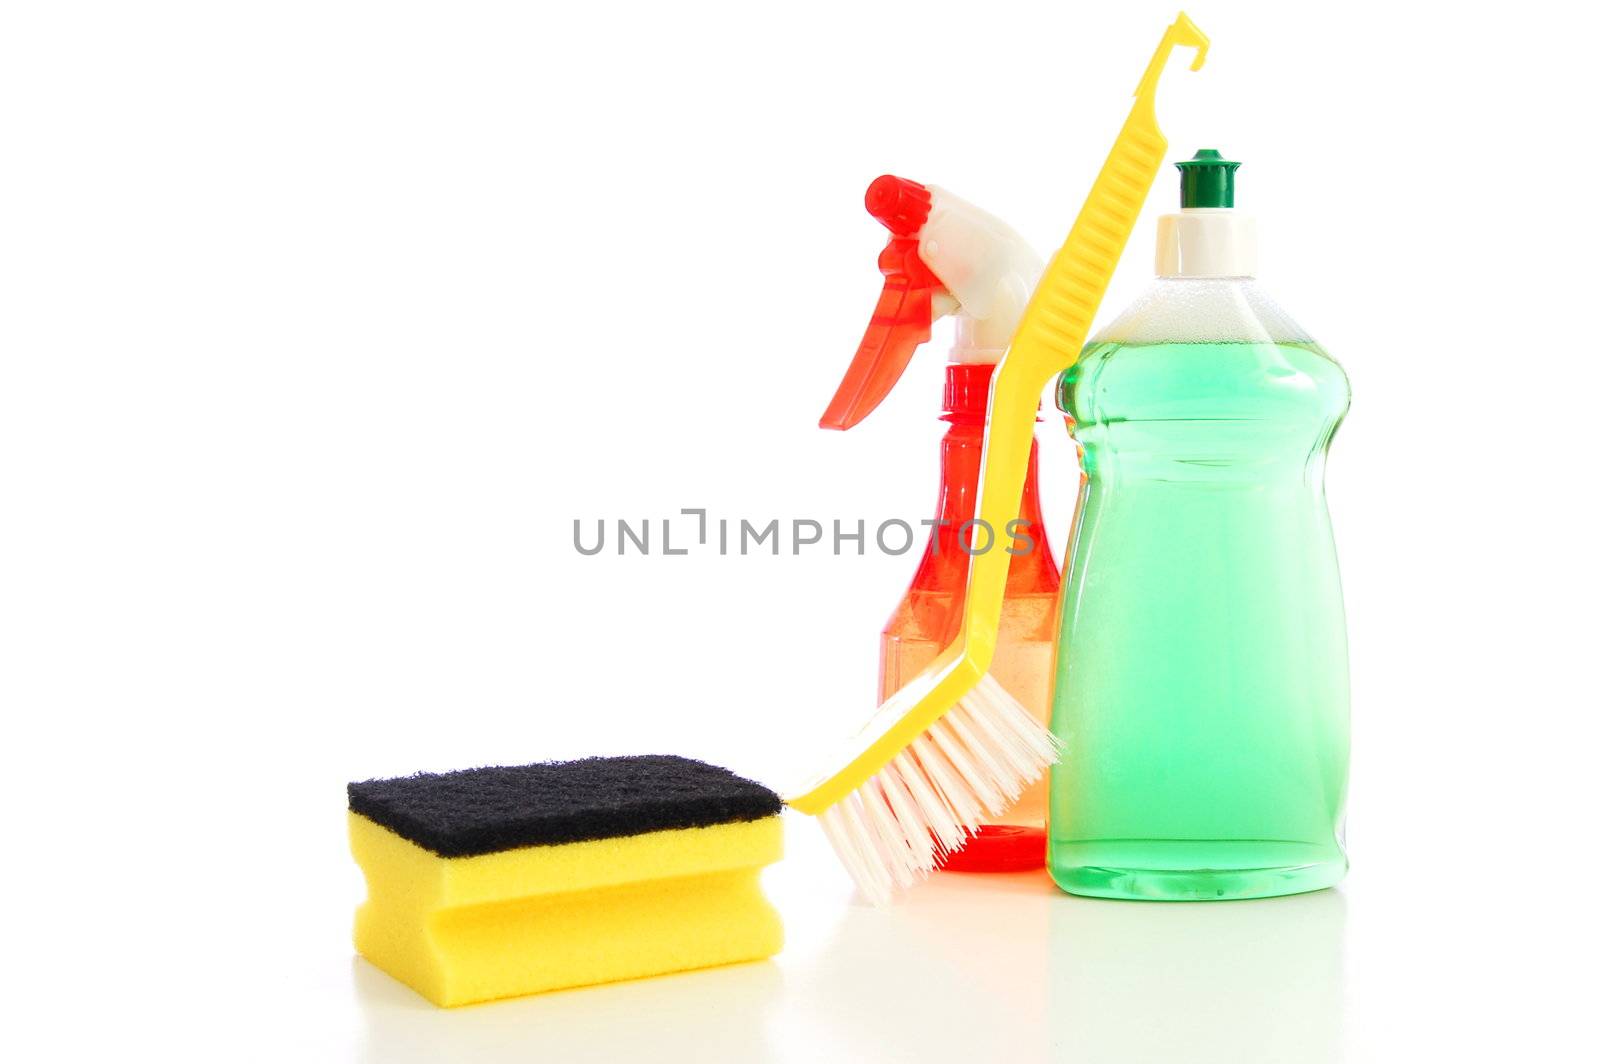 cleaning equipment for cleaning kitchen and bath and housework